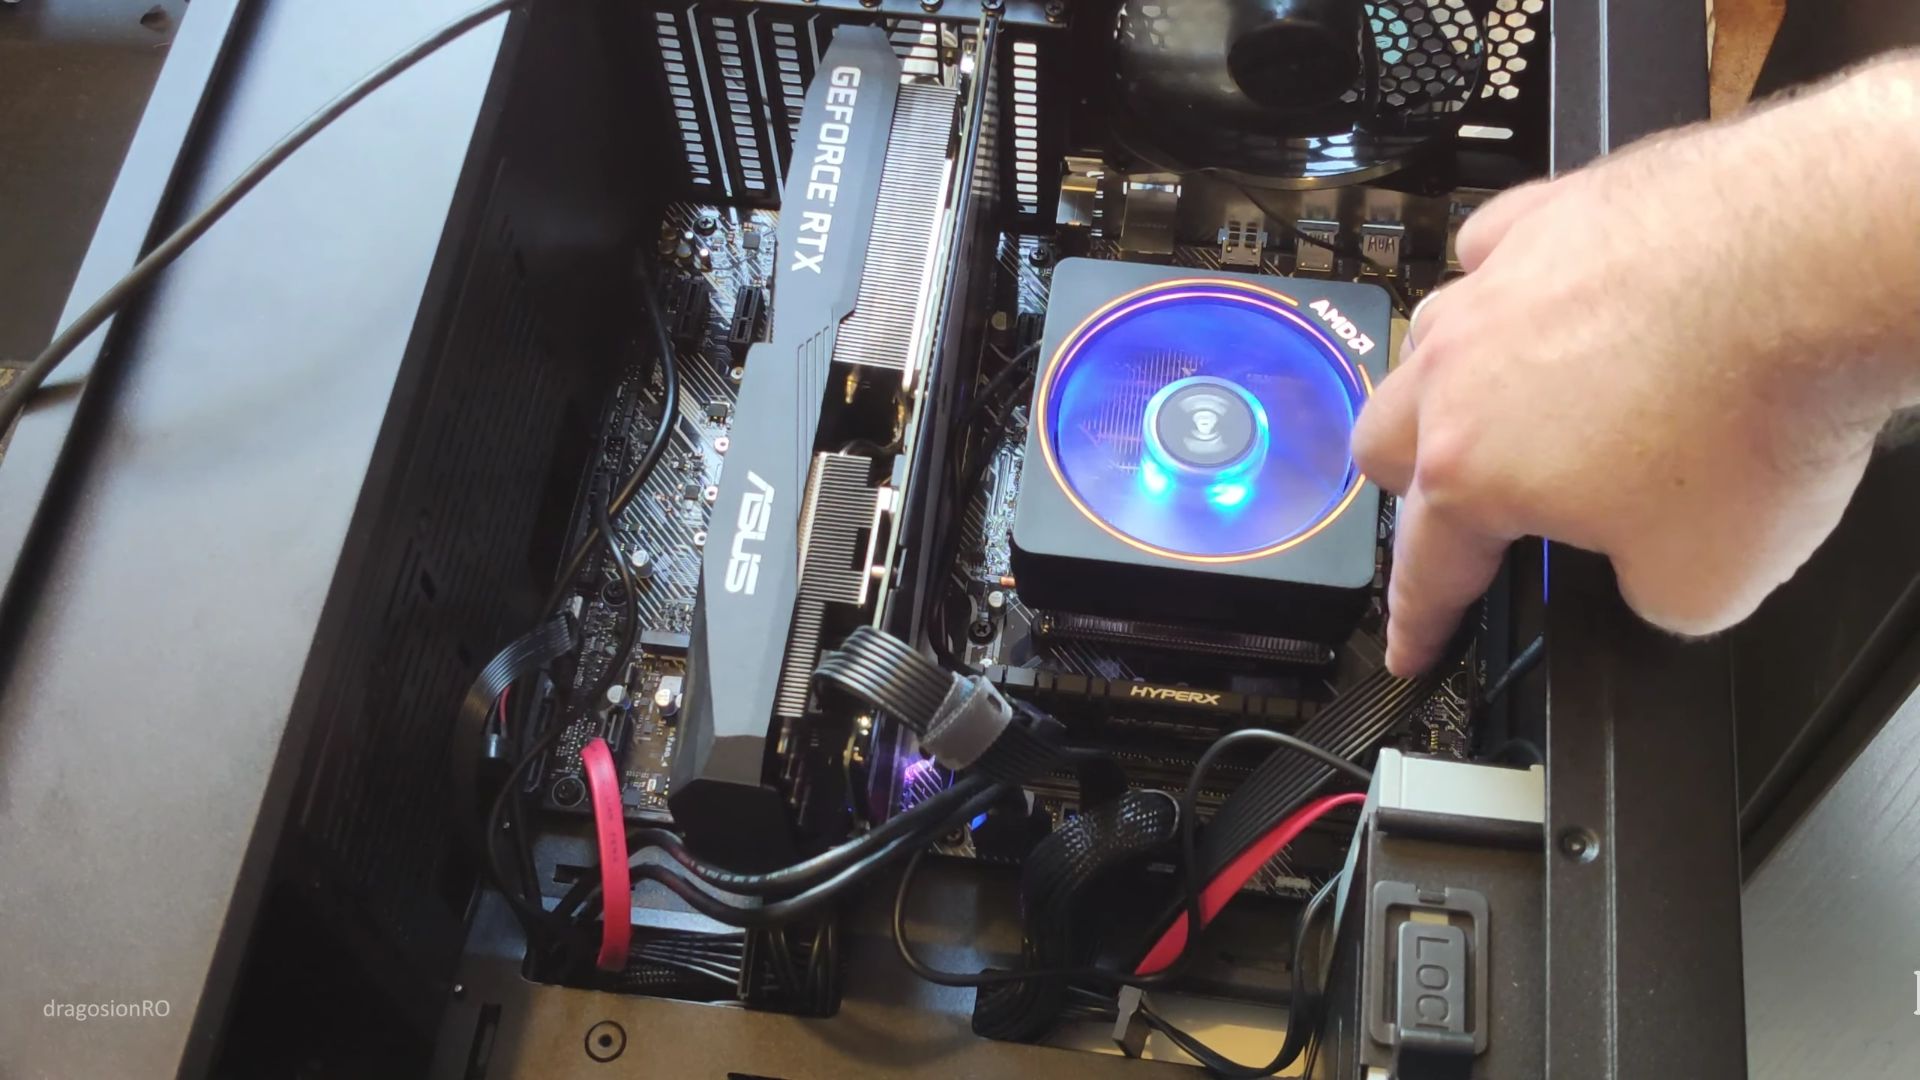 How to build a PC from parts